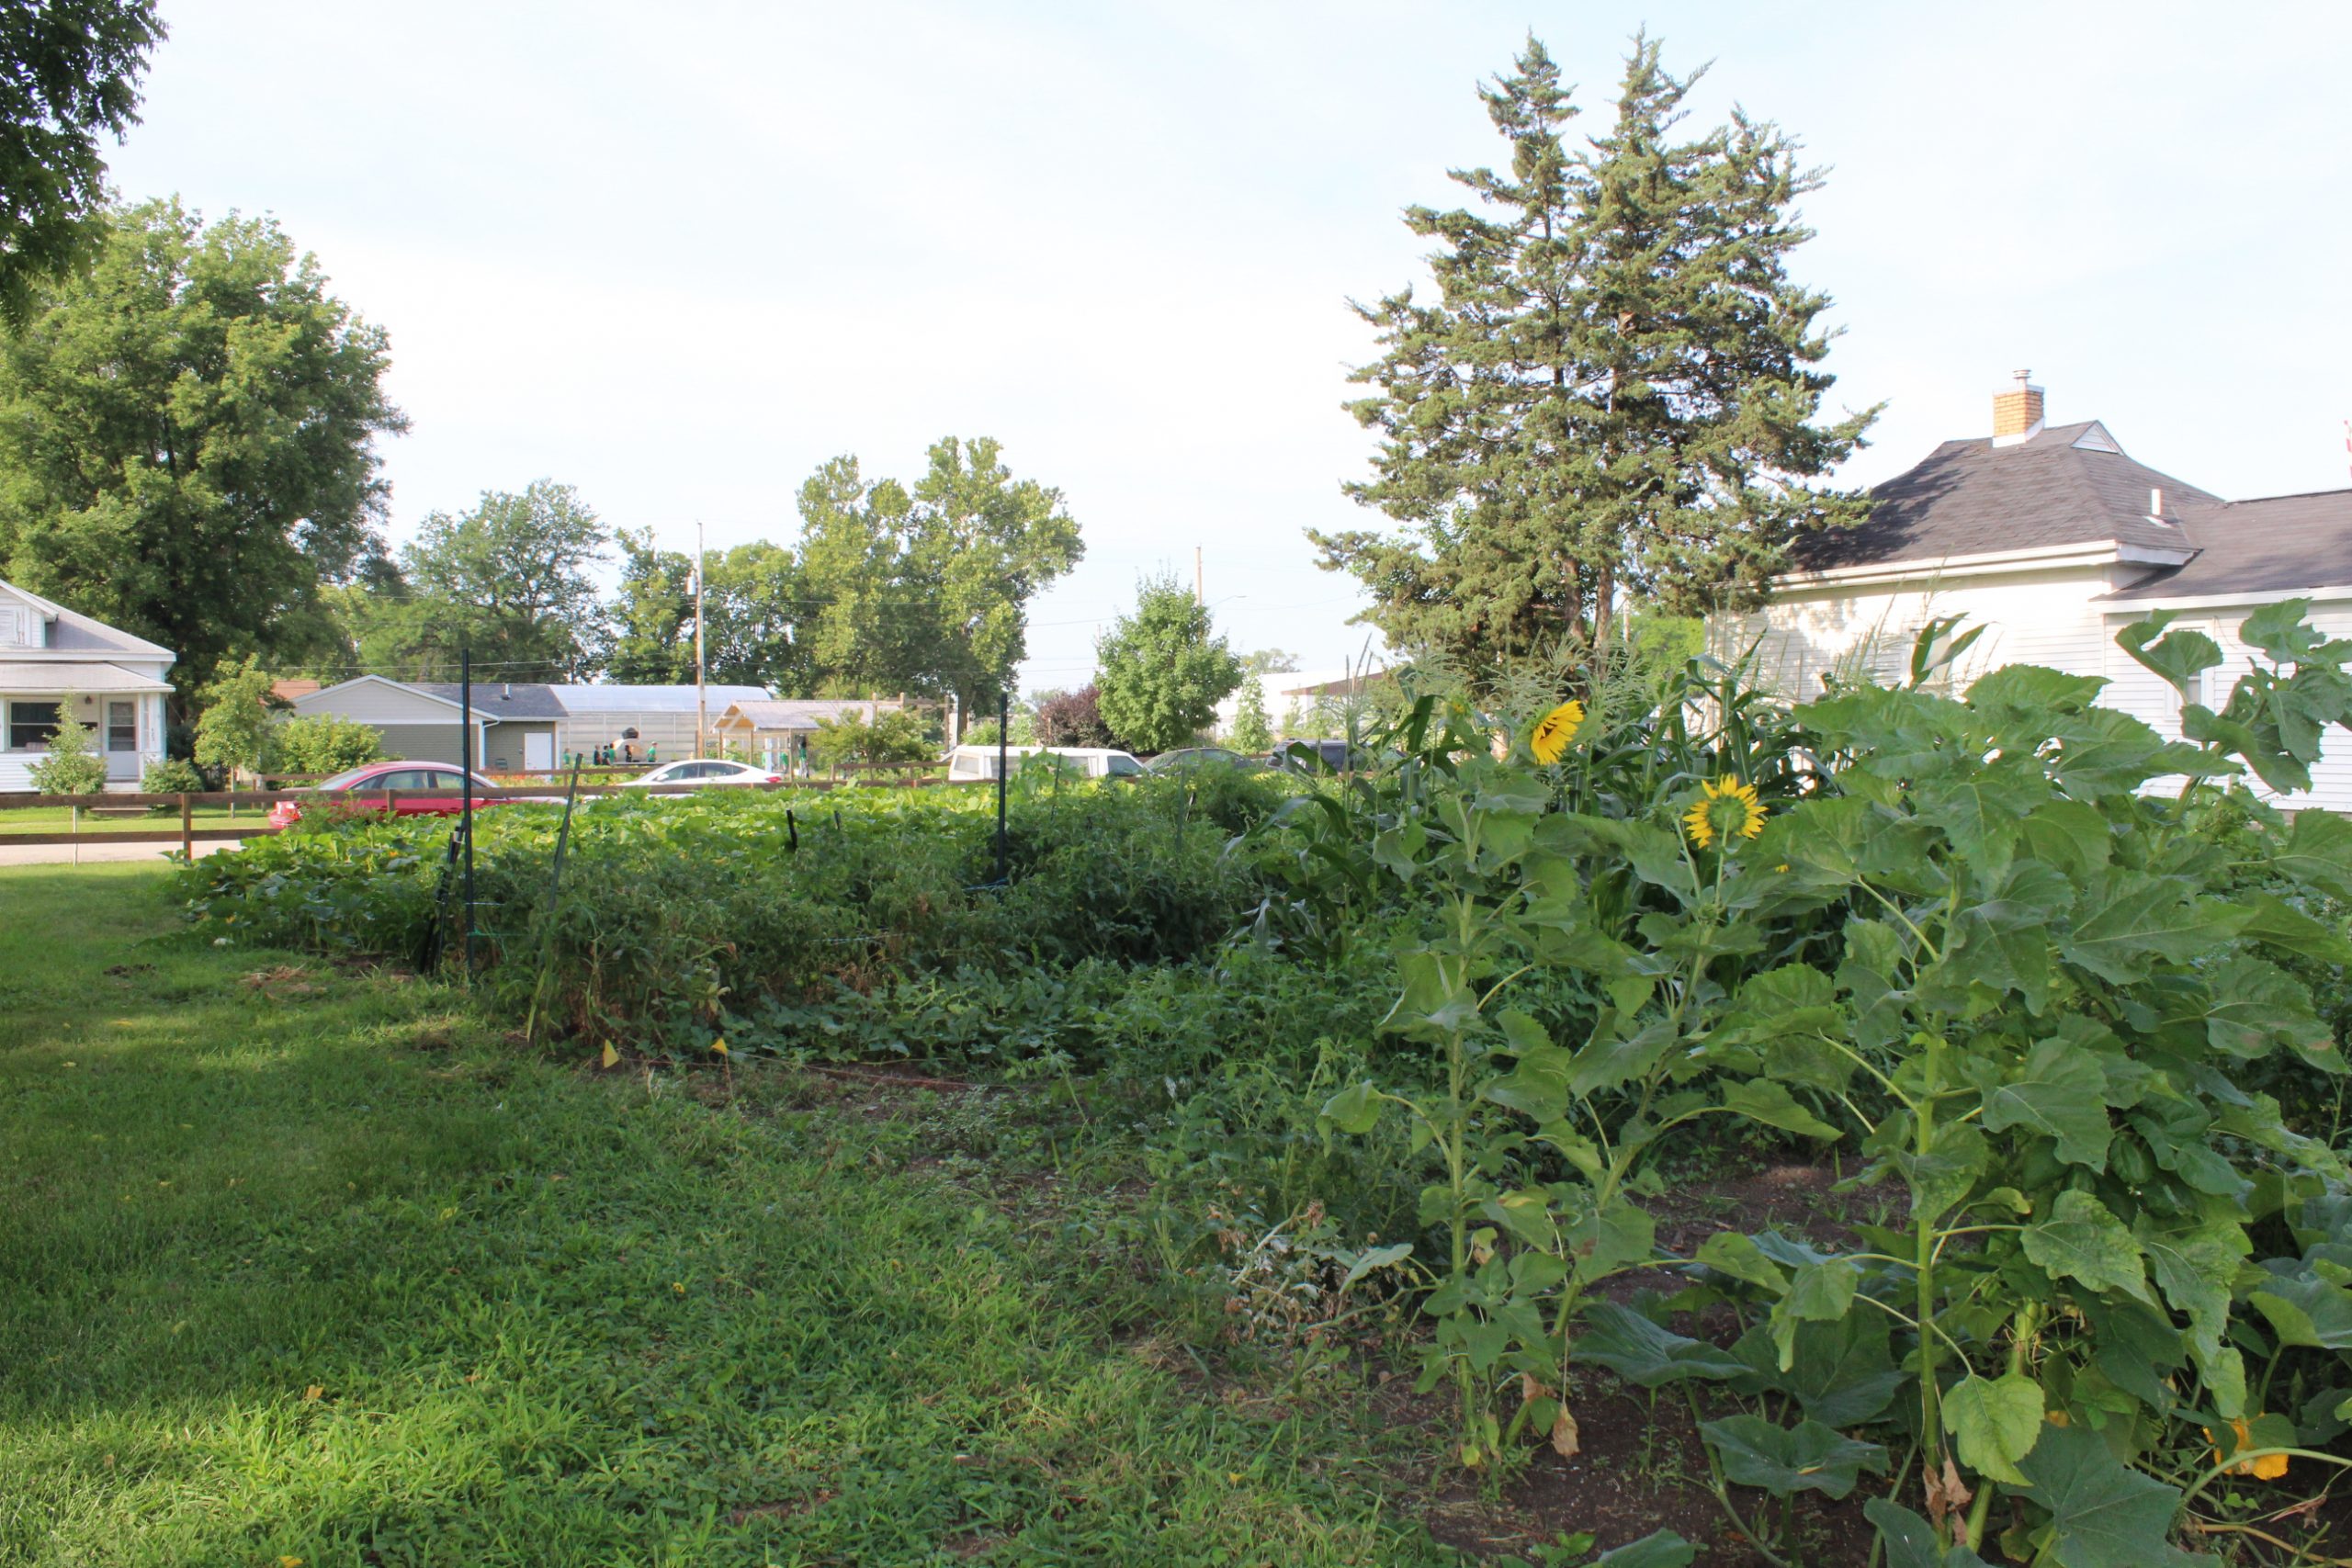 Rent a Community Garden plot at the Cultivate Hope Urban Farm!